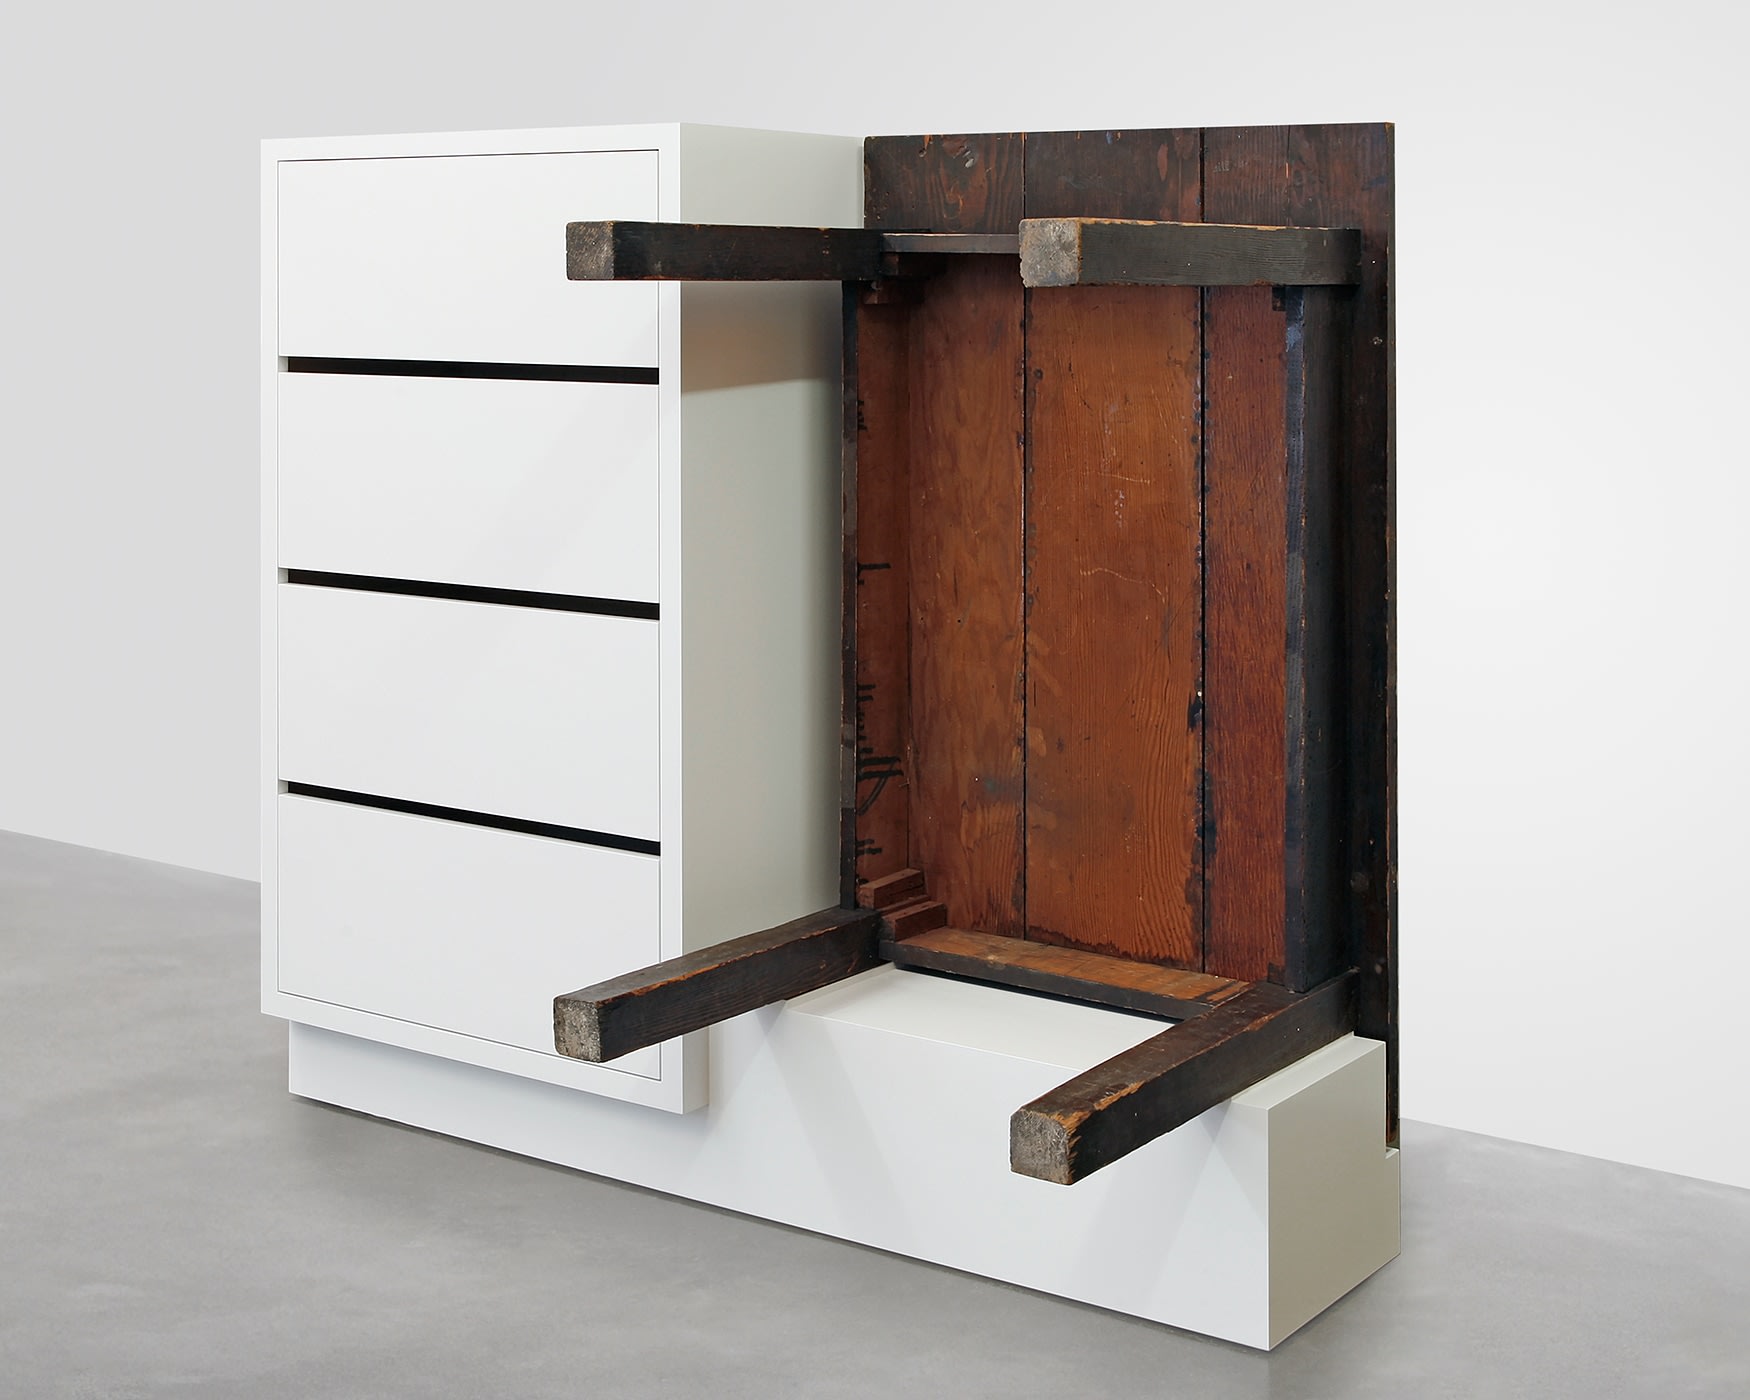 Roy McMakin, Chest of Drawers with Table, 2016